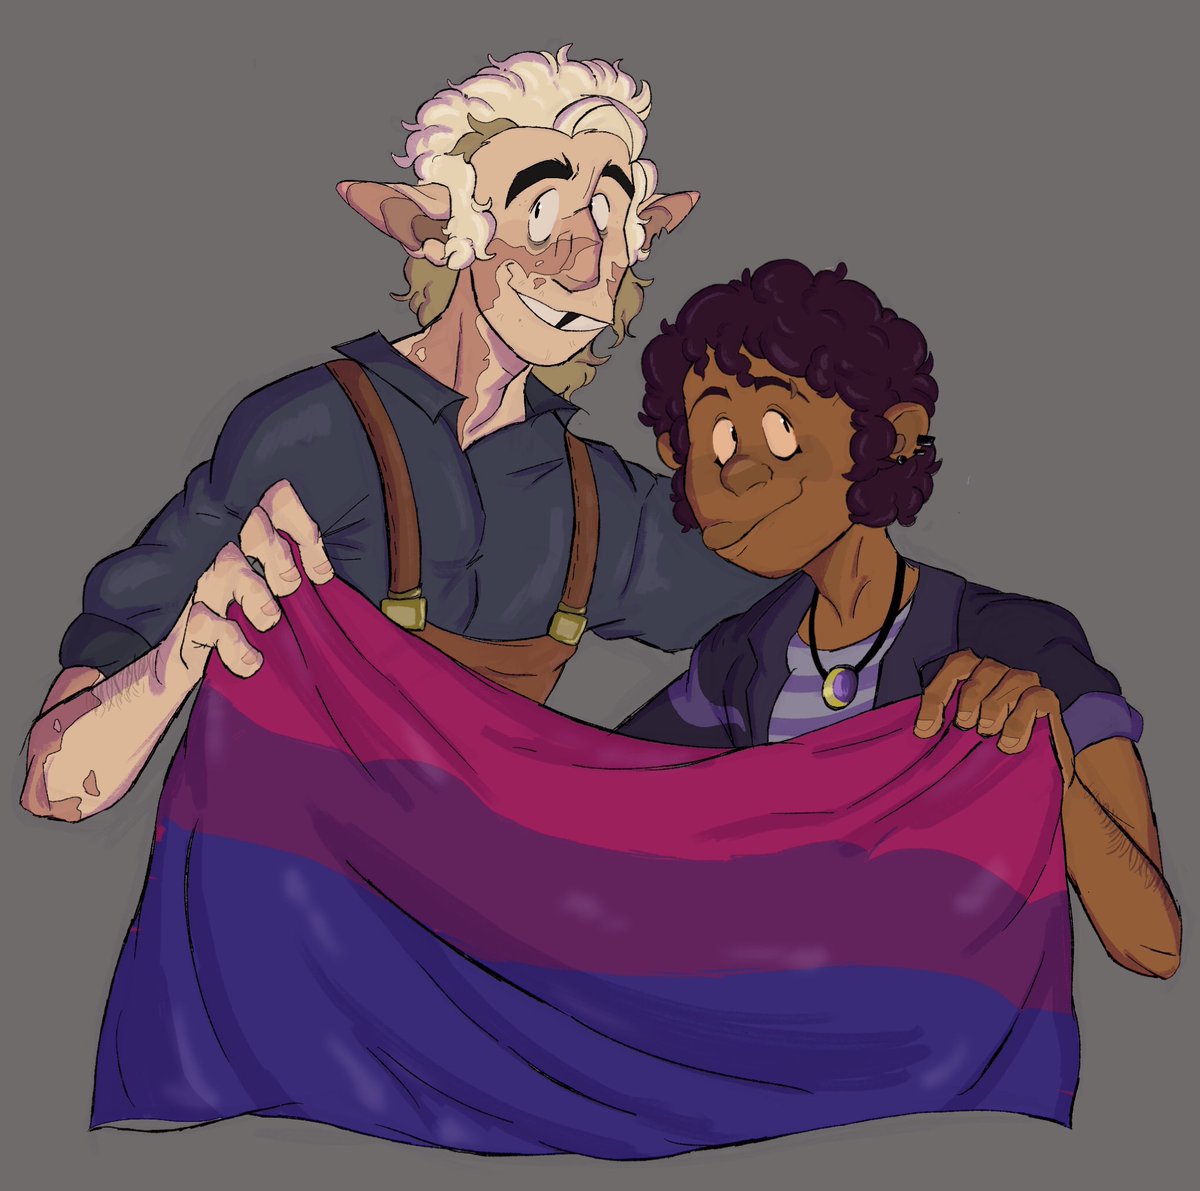 bisexuals. if you even care 
#BiVisibilityMonth #toh